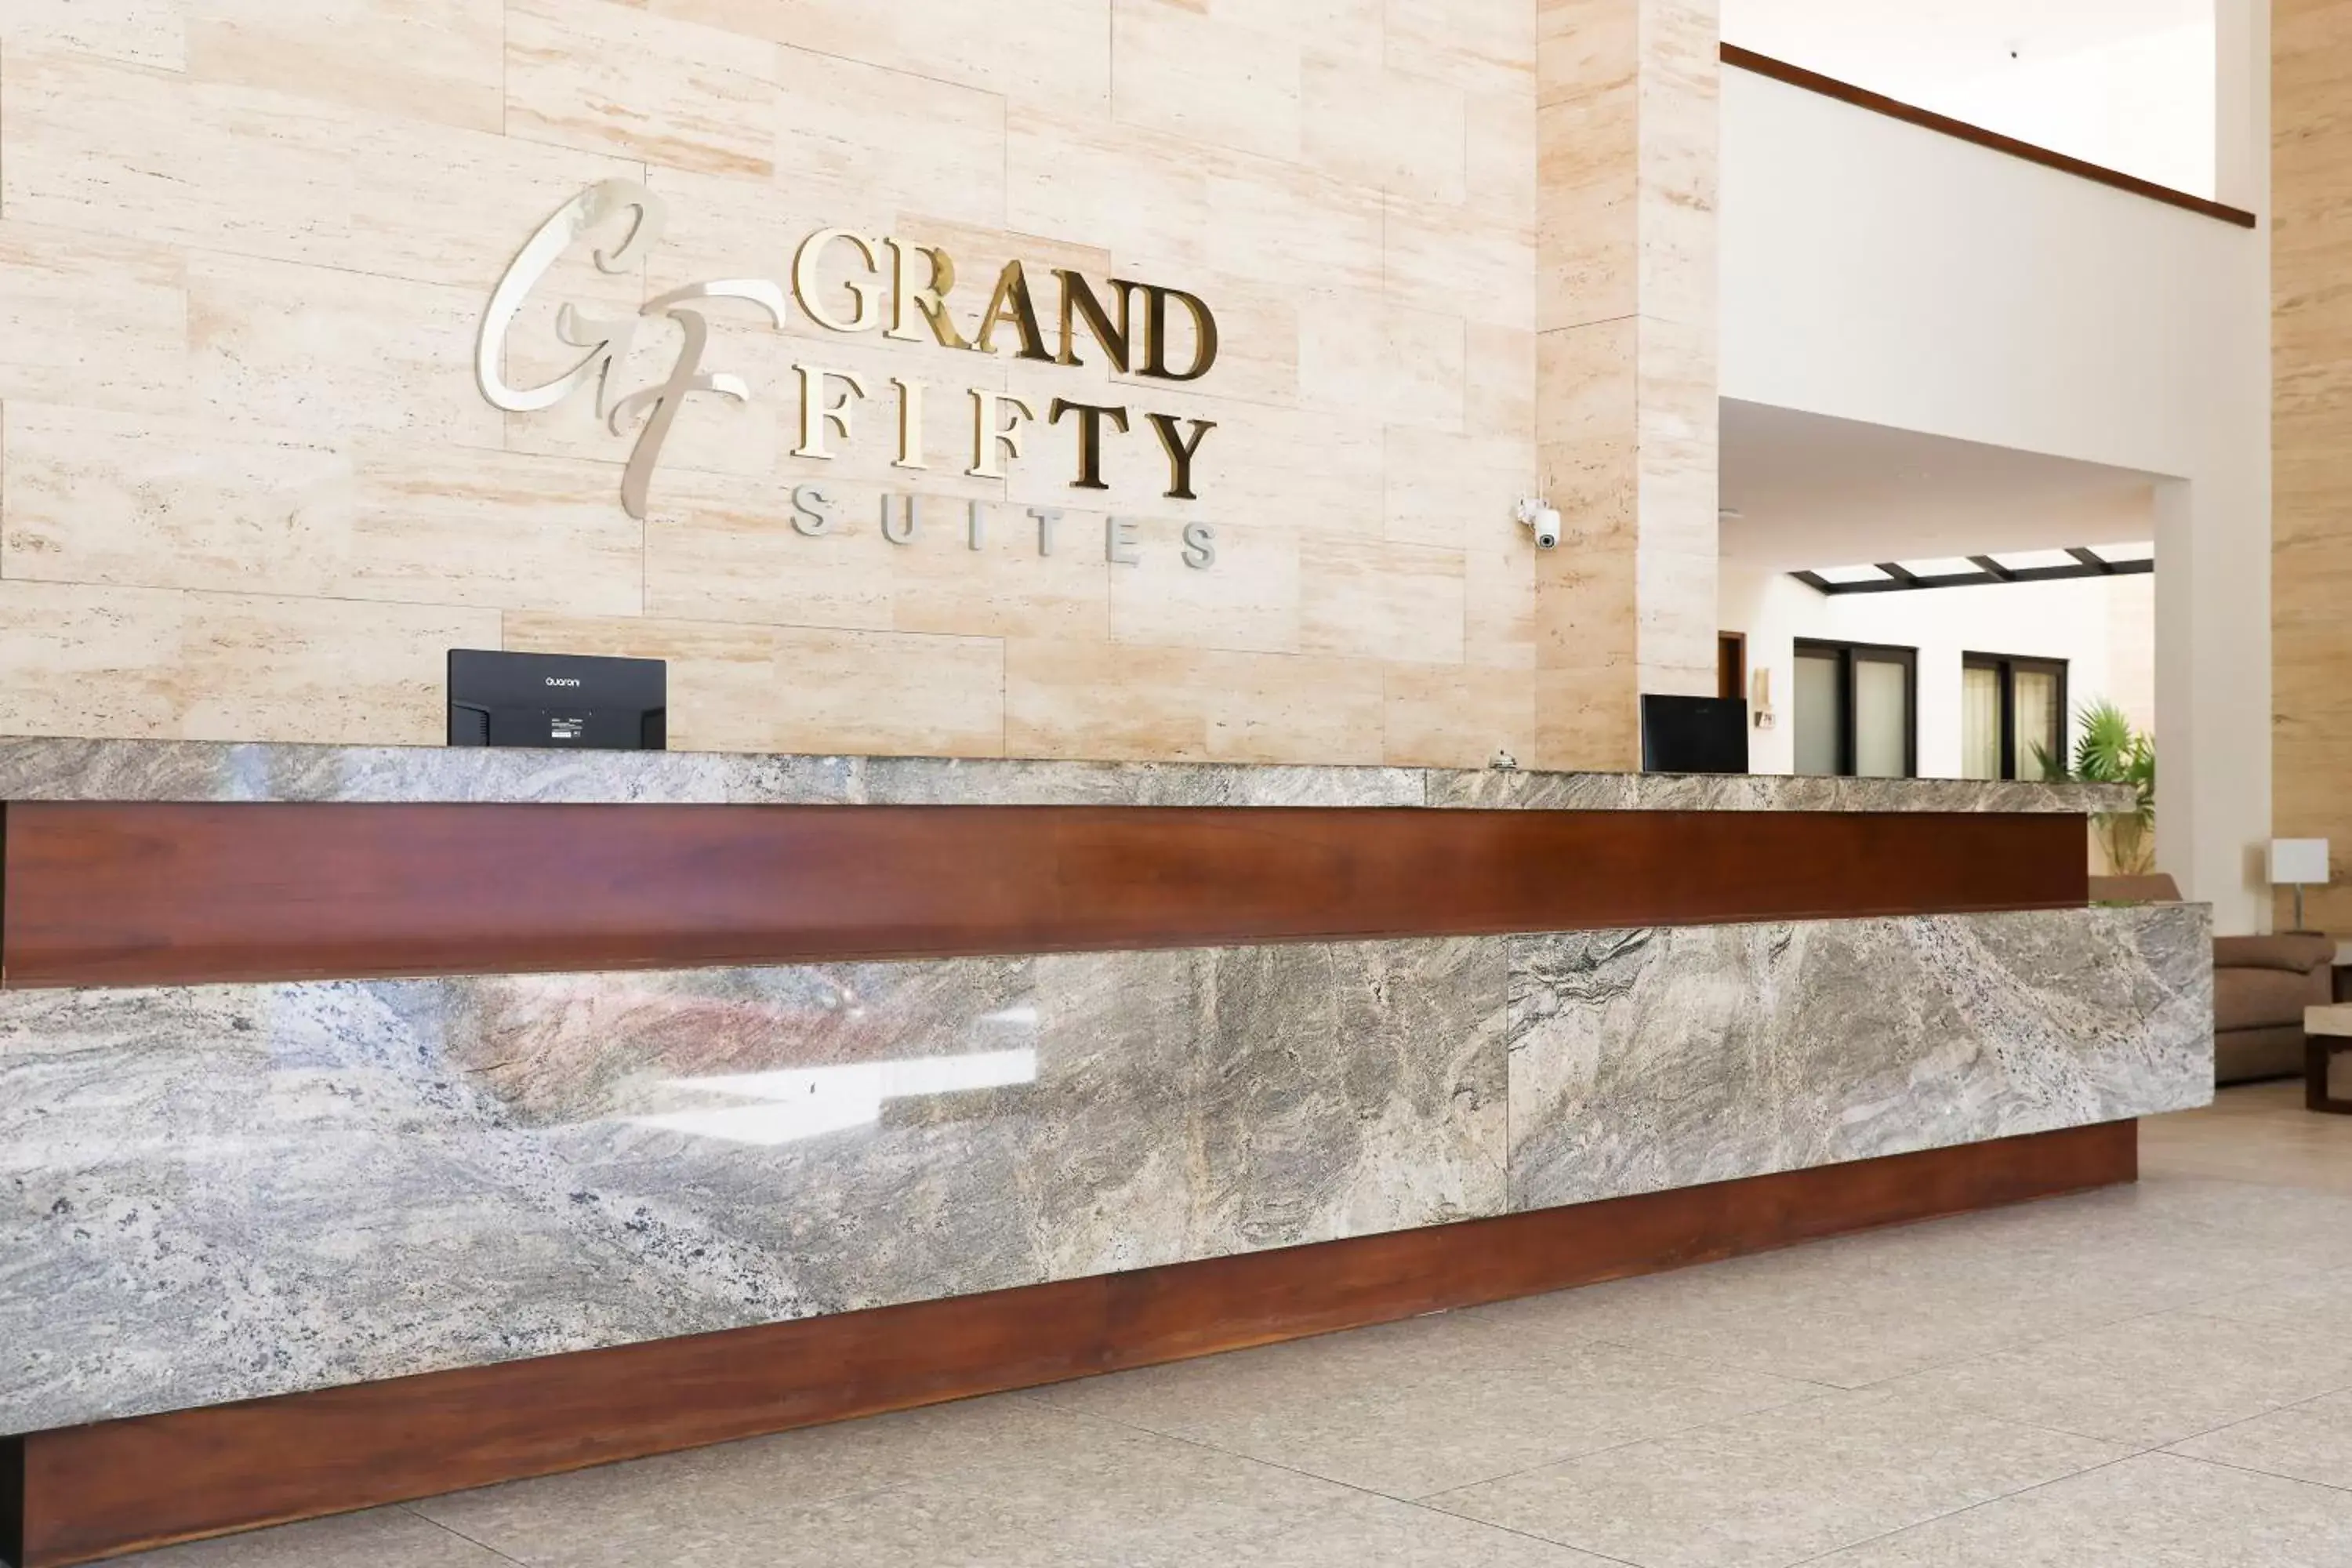 Property logo or sign in Grand Fifty Suites